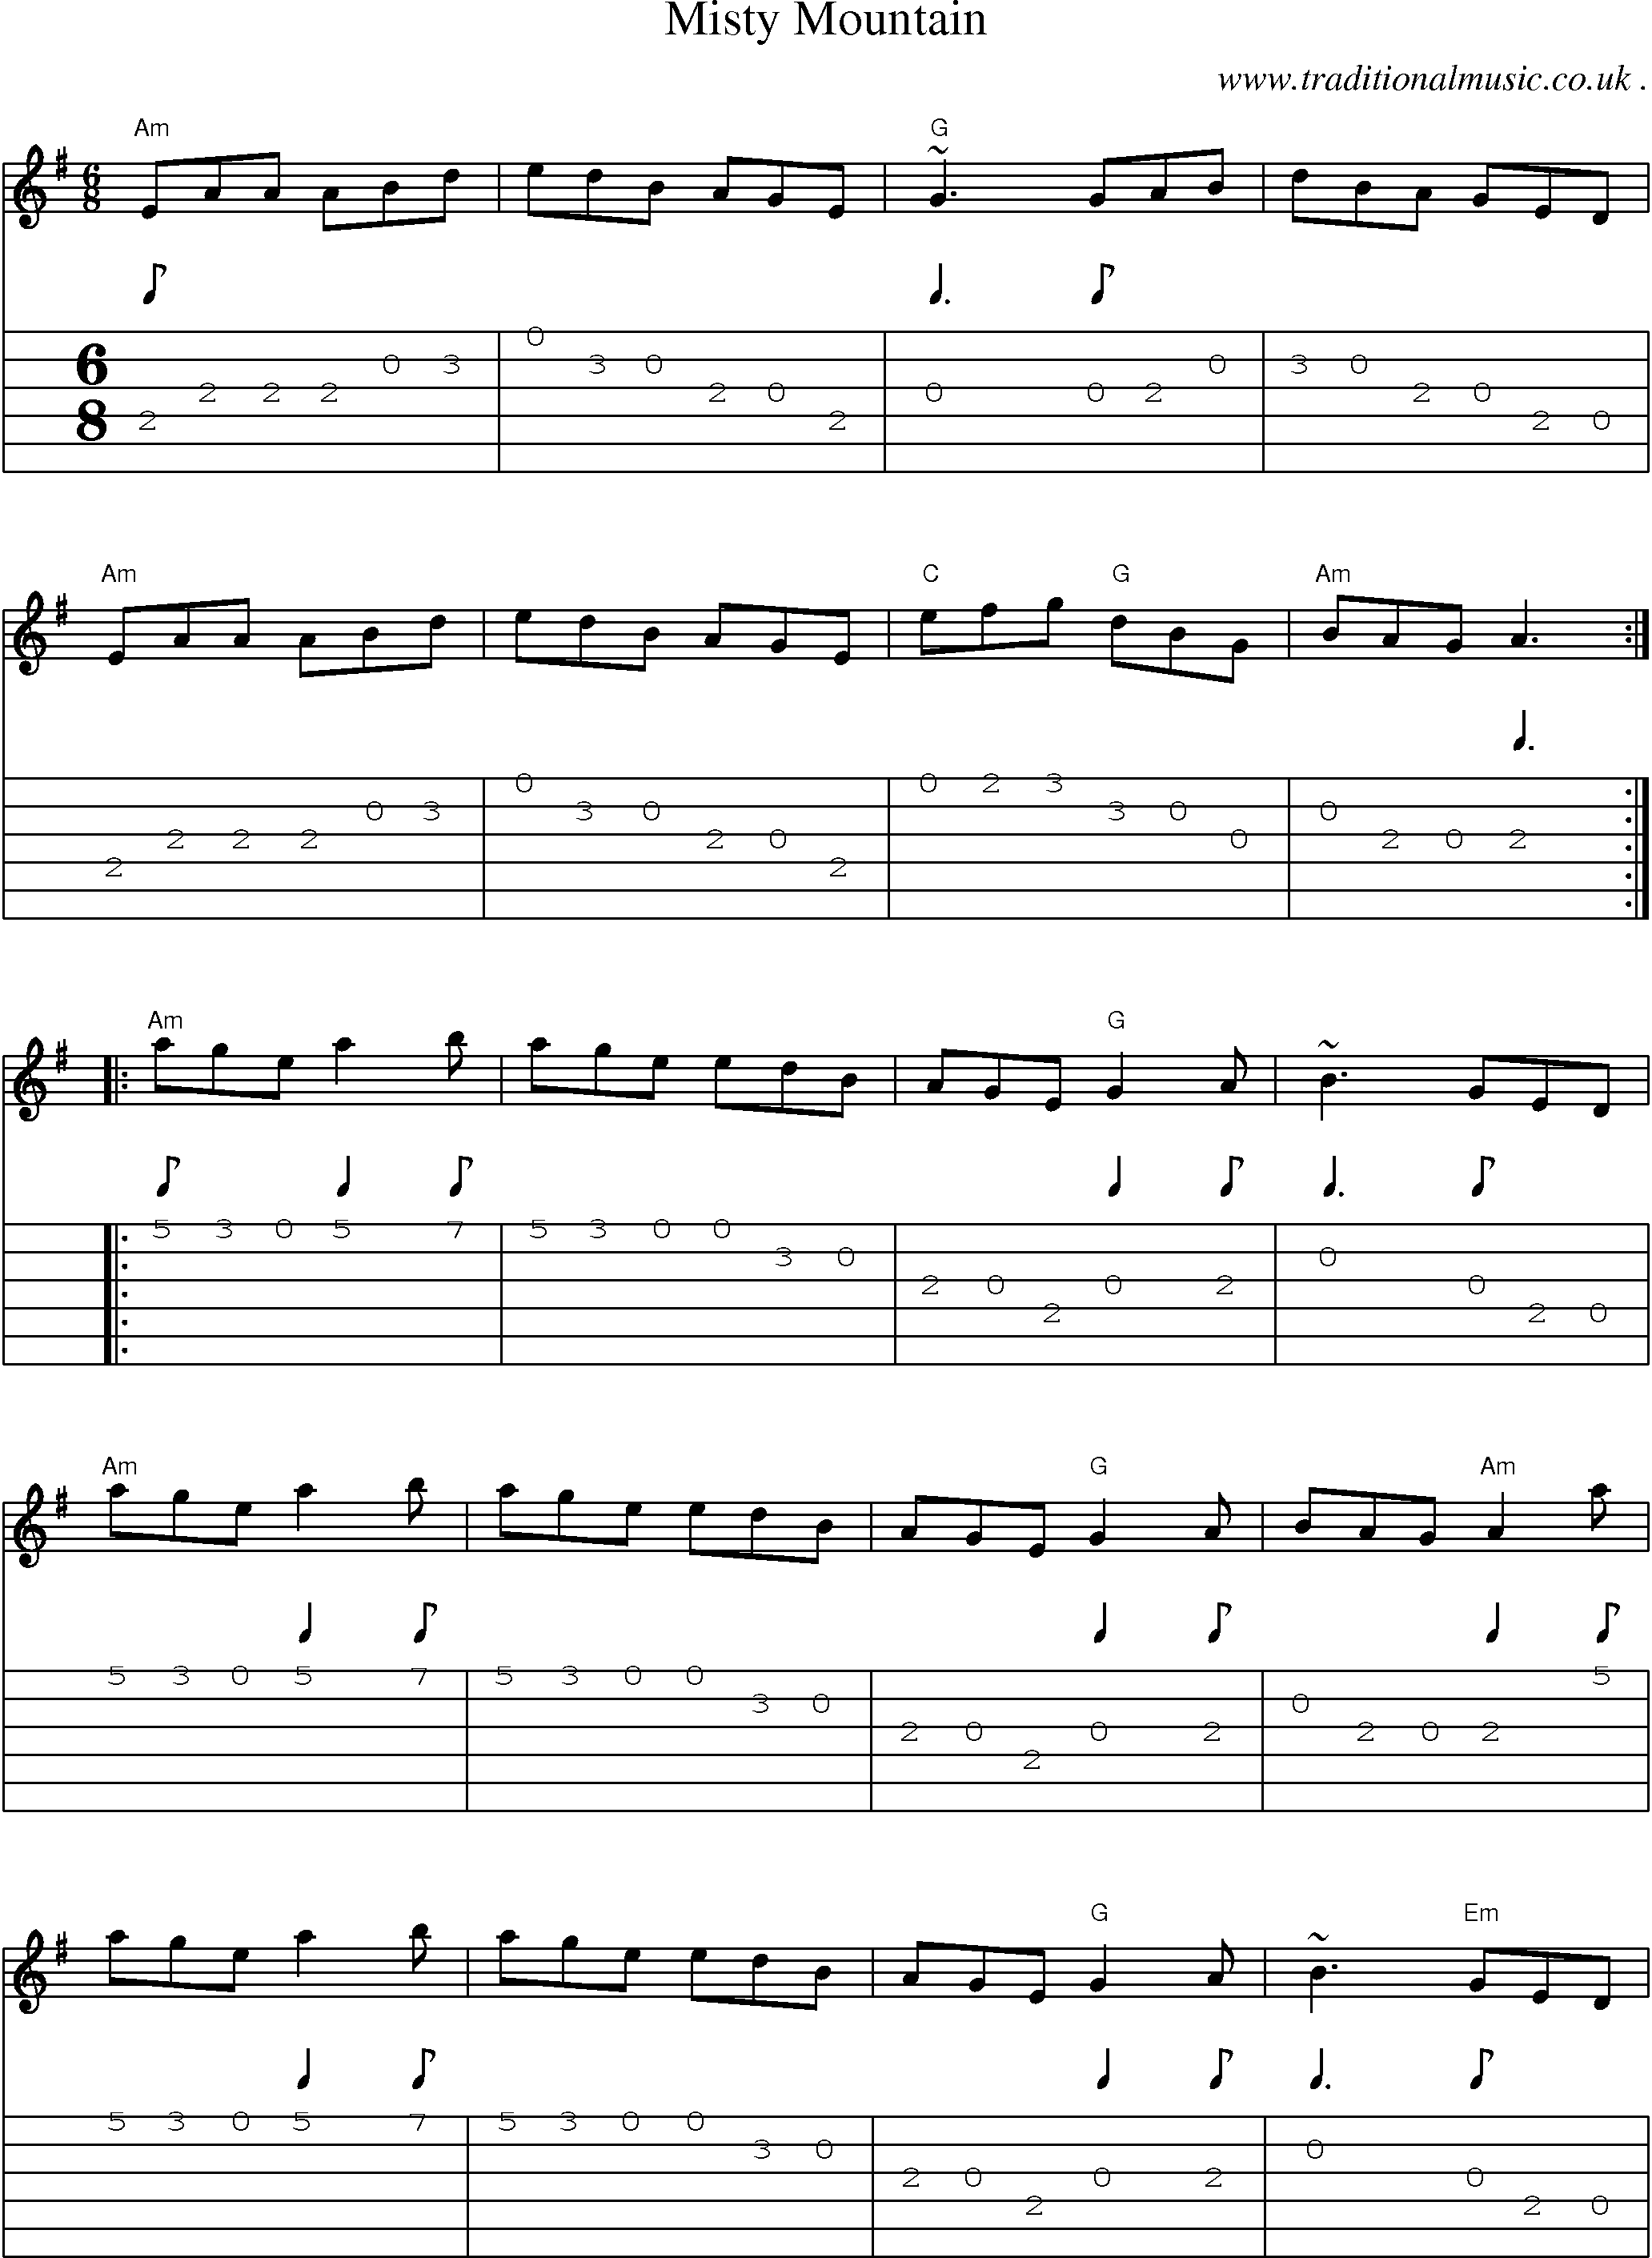 Music Score and Guitar Tabs for Misty Mountain